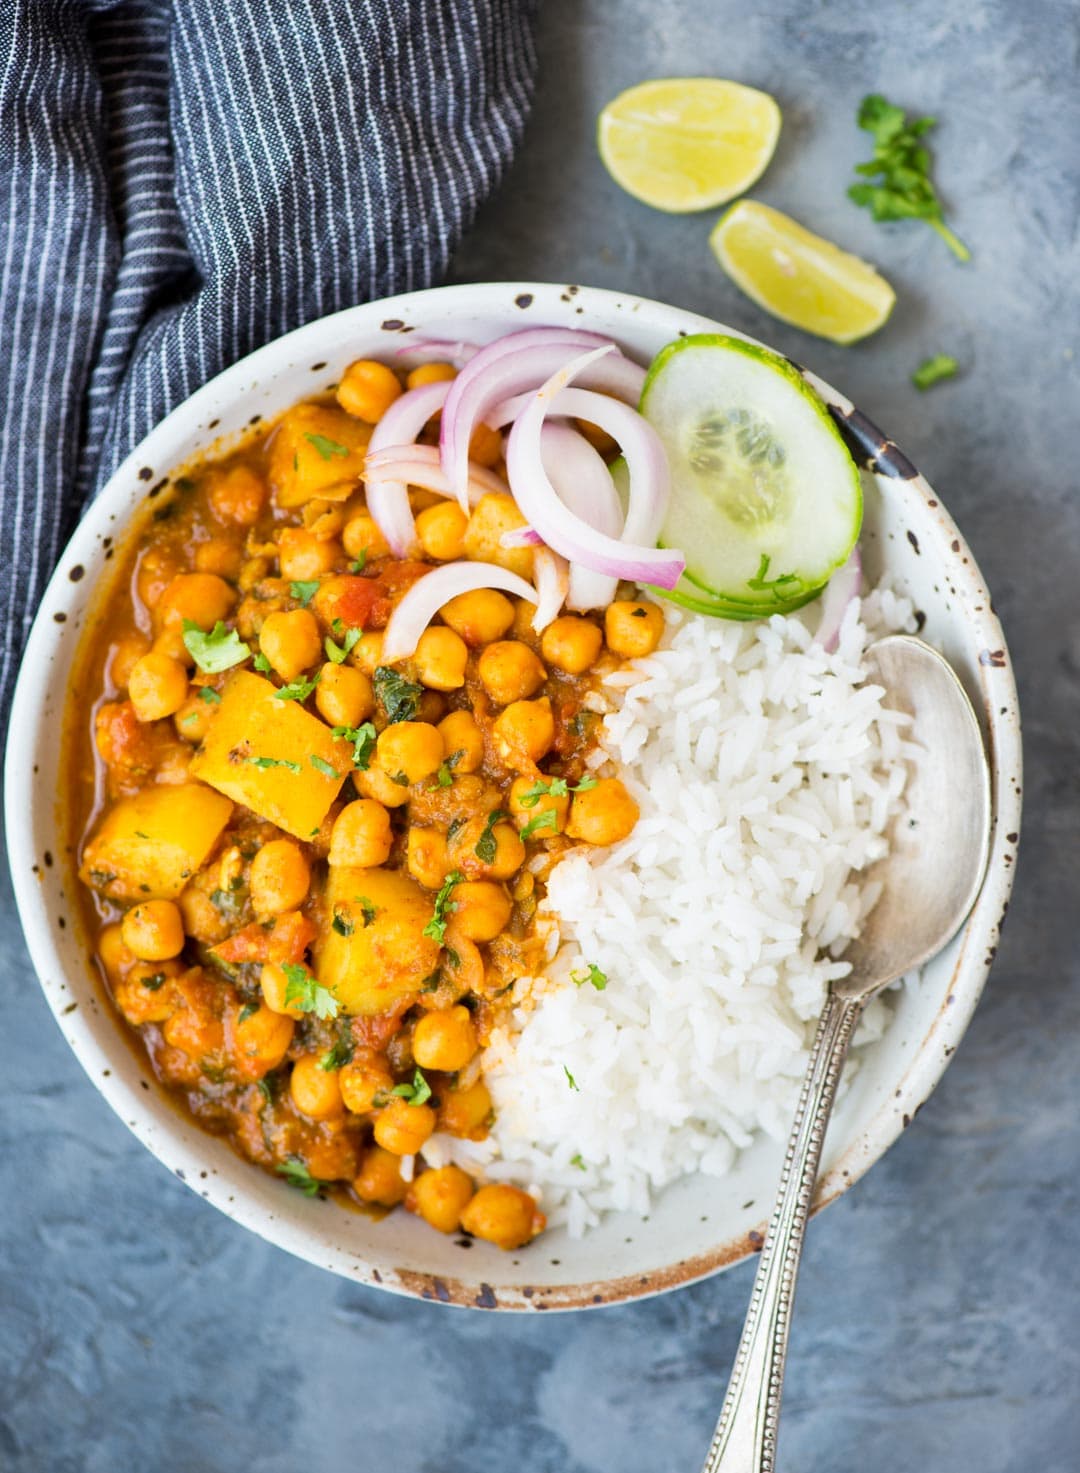 Chickpea curry with potato or Chana Aloo served in a bowl with rice, and slices of cucumber or onion.